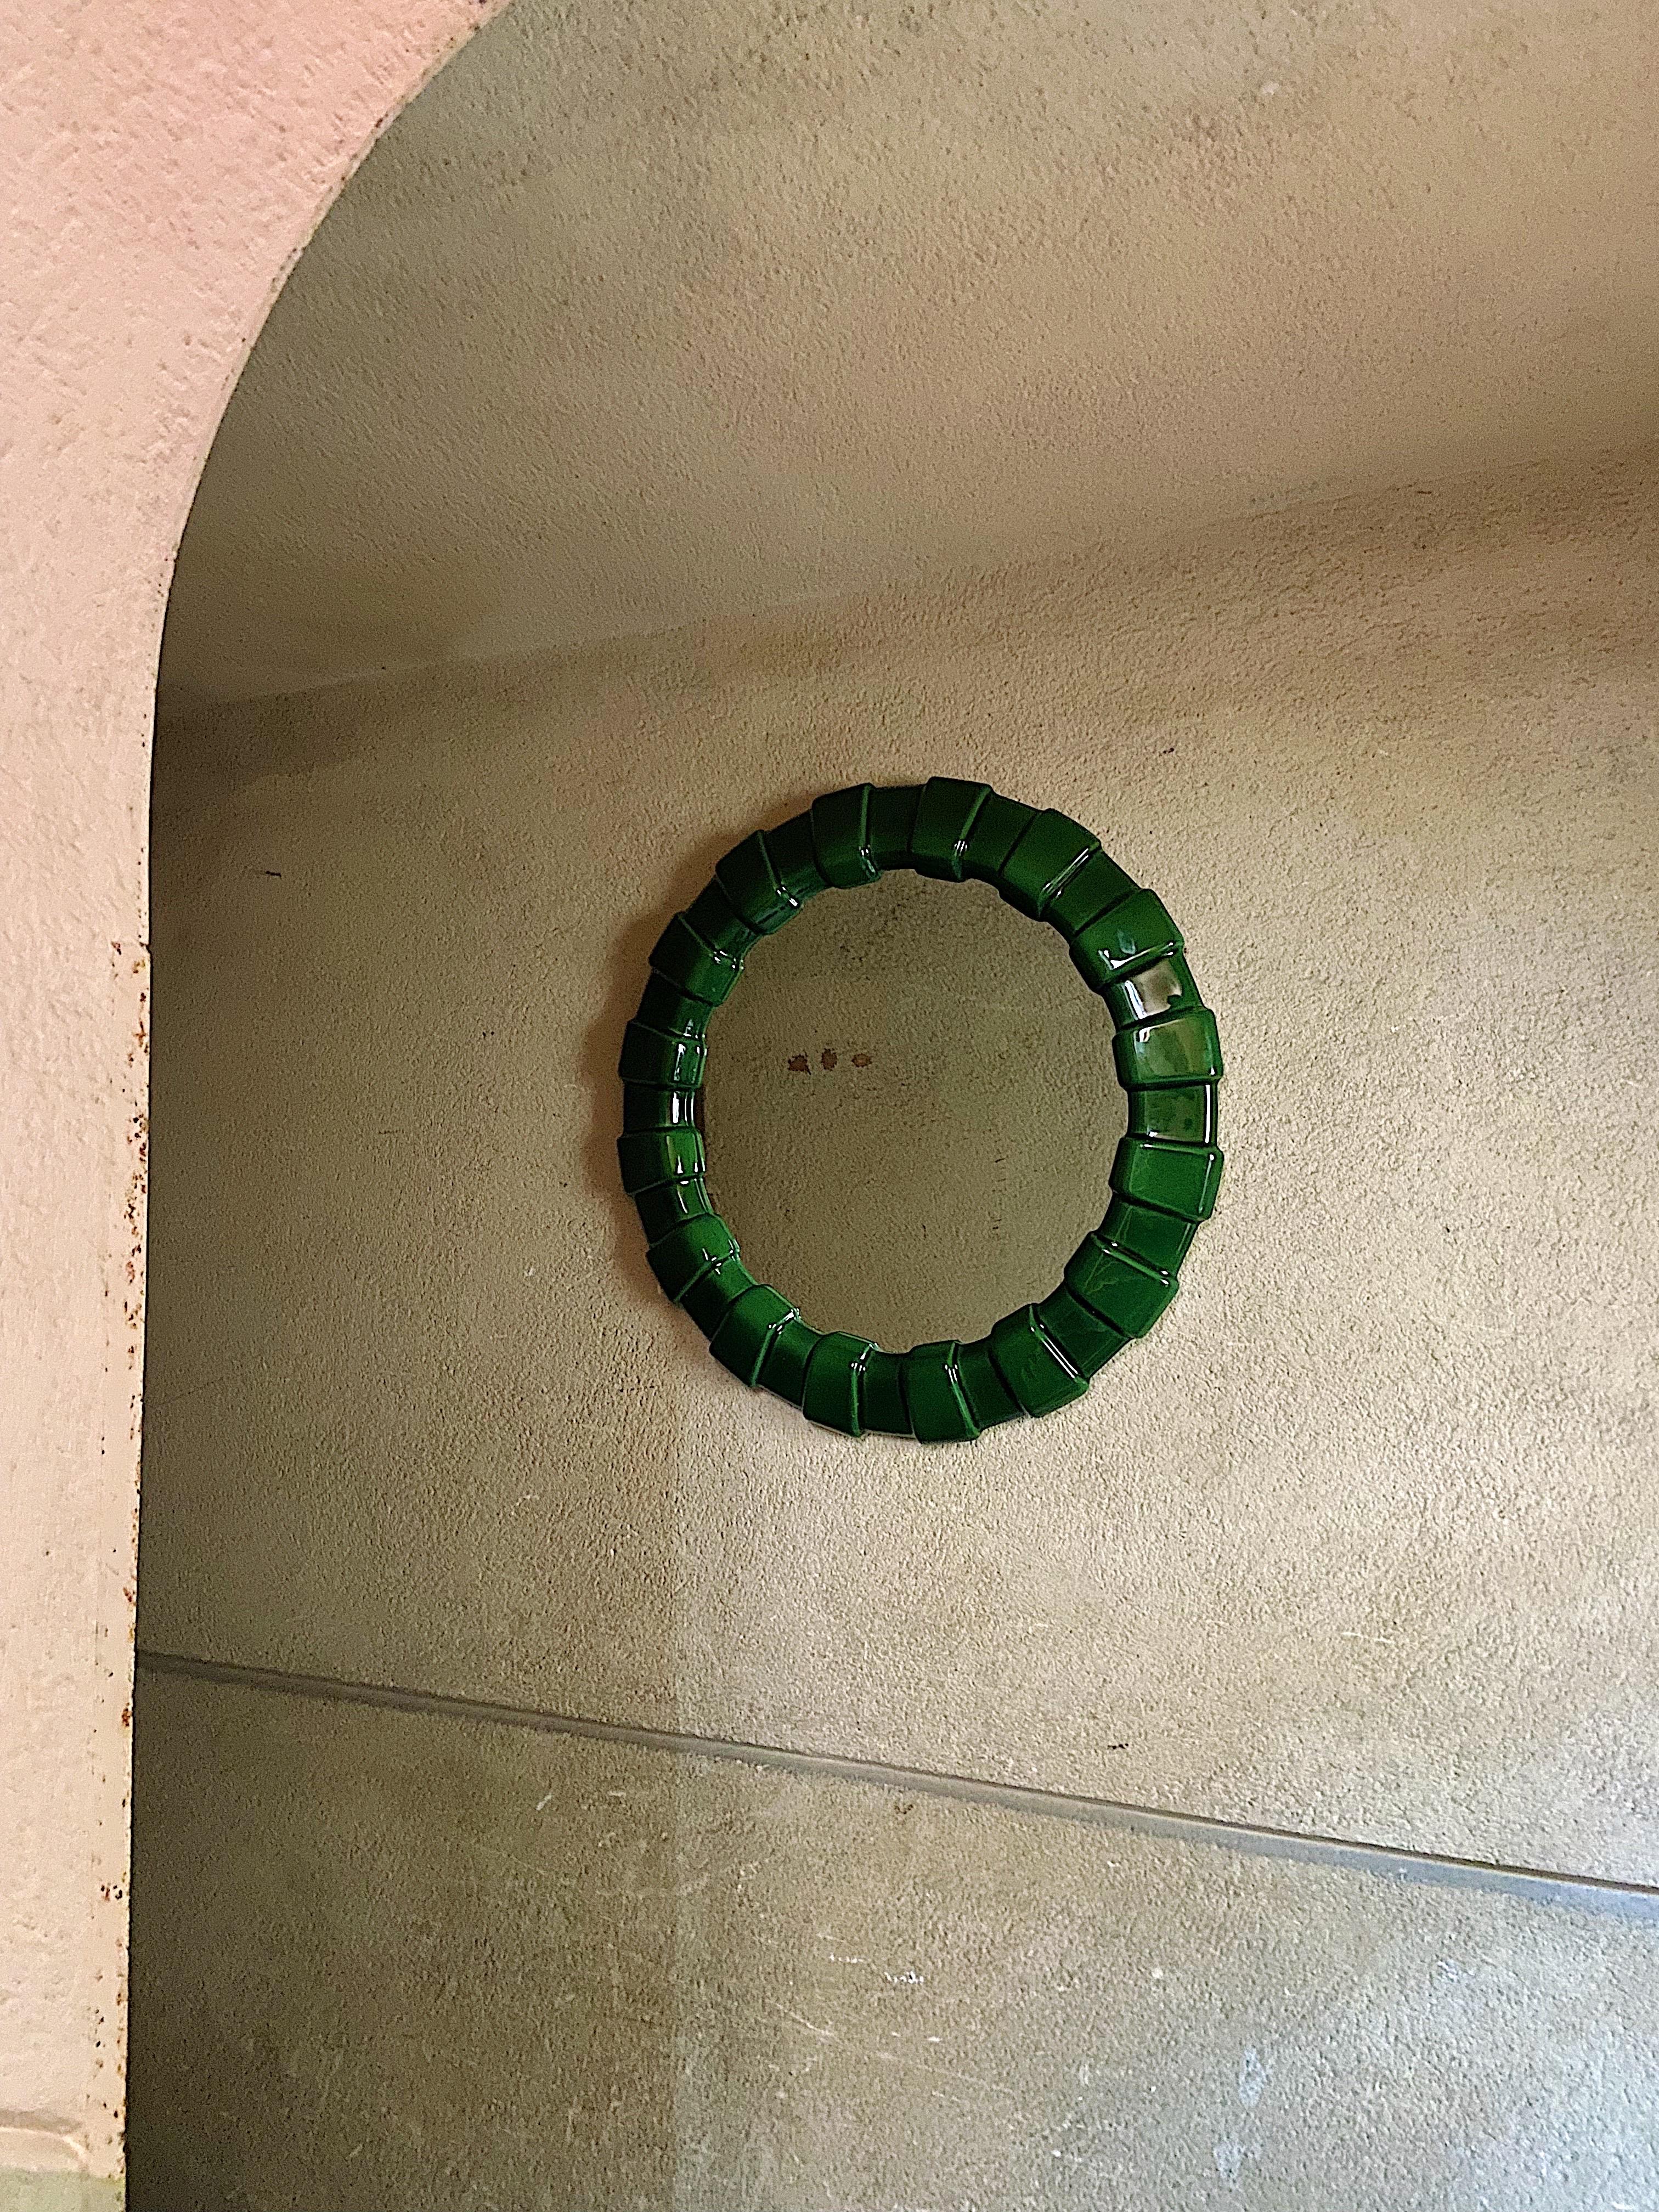 Very beautiful ceramic wall mirror. Extraordinary design with its round and in the same time irregular shape made of ceramic coloured in emerald green.

Manufactured in the 1970s.

Very elaborately processed with many beautiful details.

Good